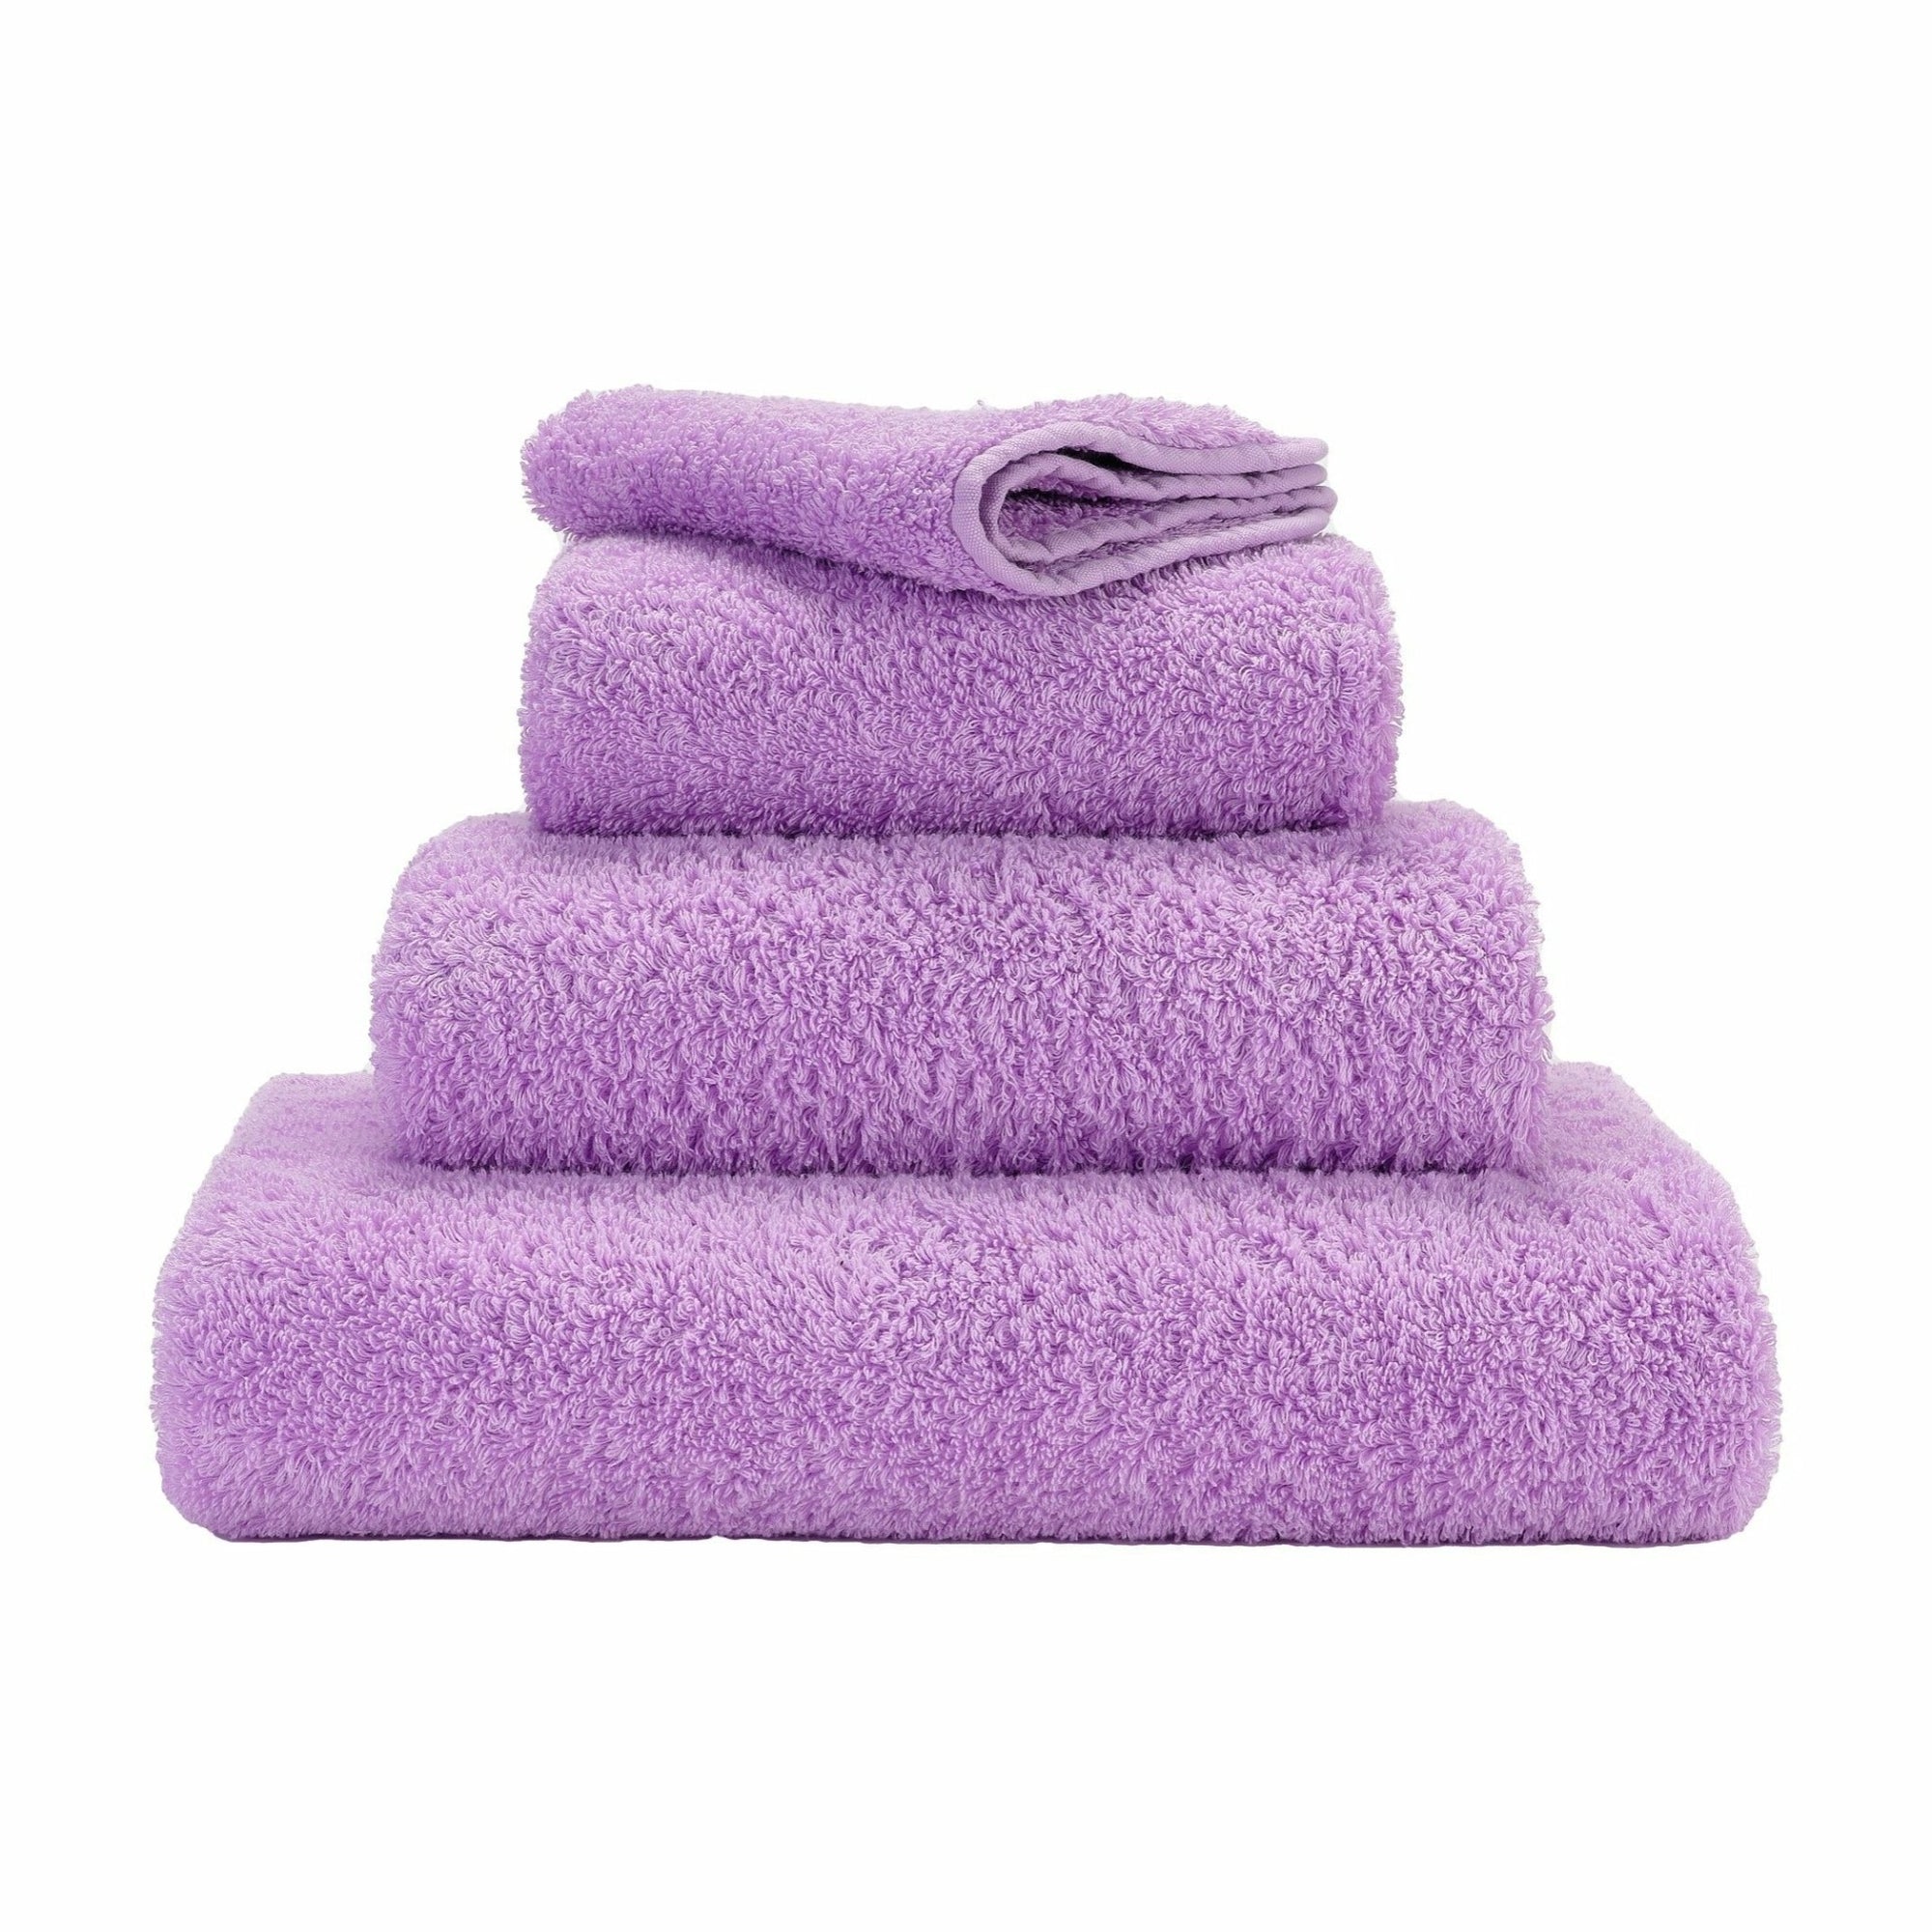 Abyss Super Pile Bath Towels Lupin Fine Lines